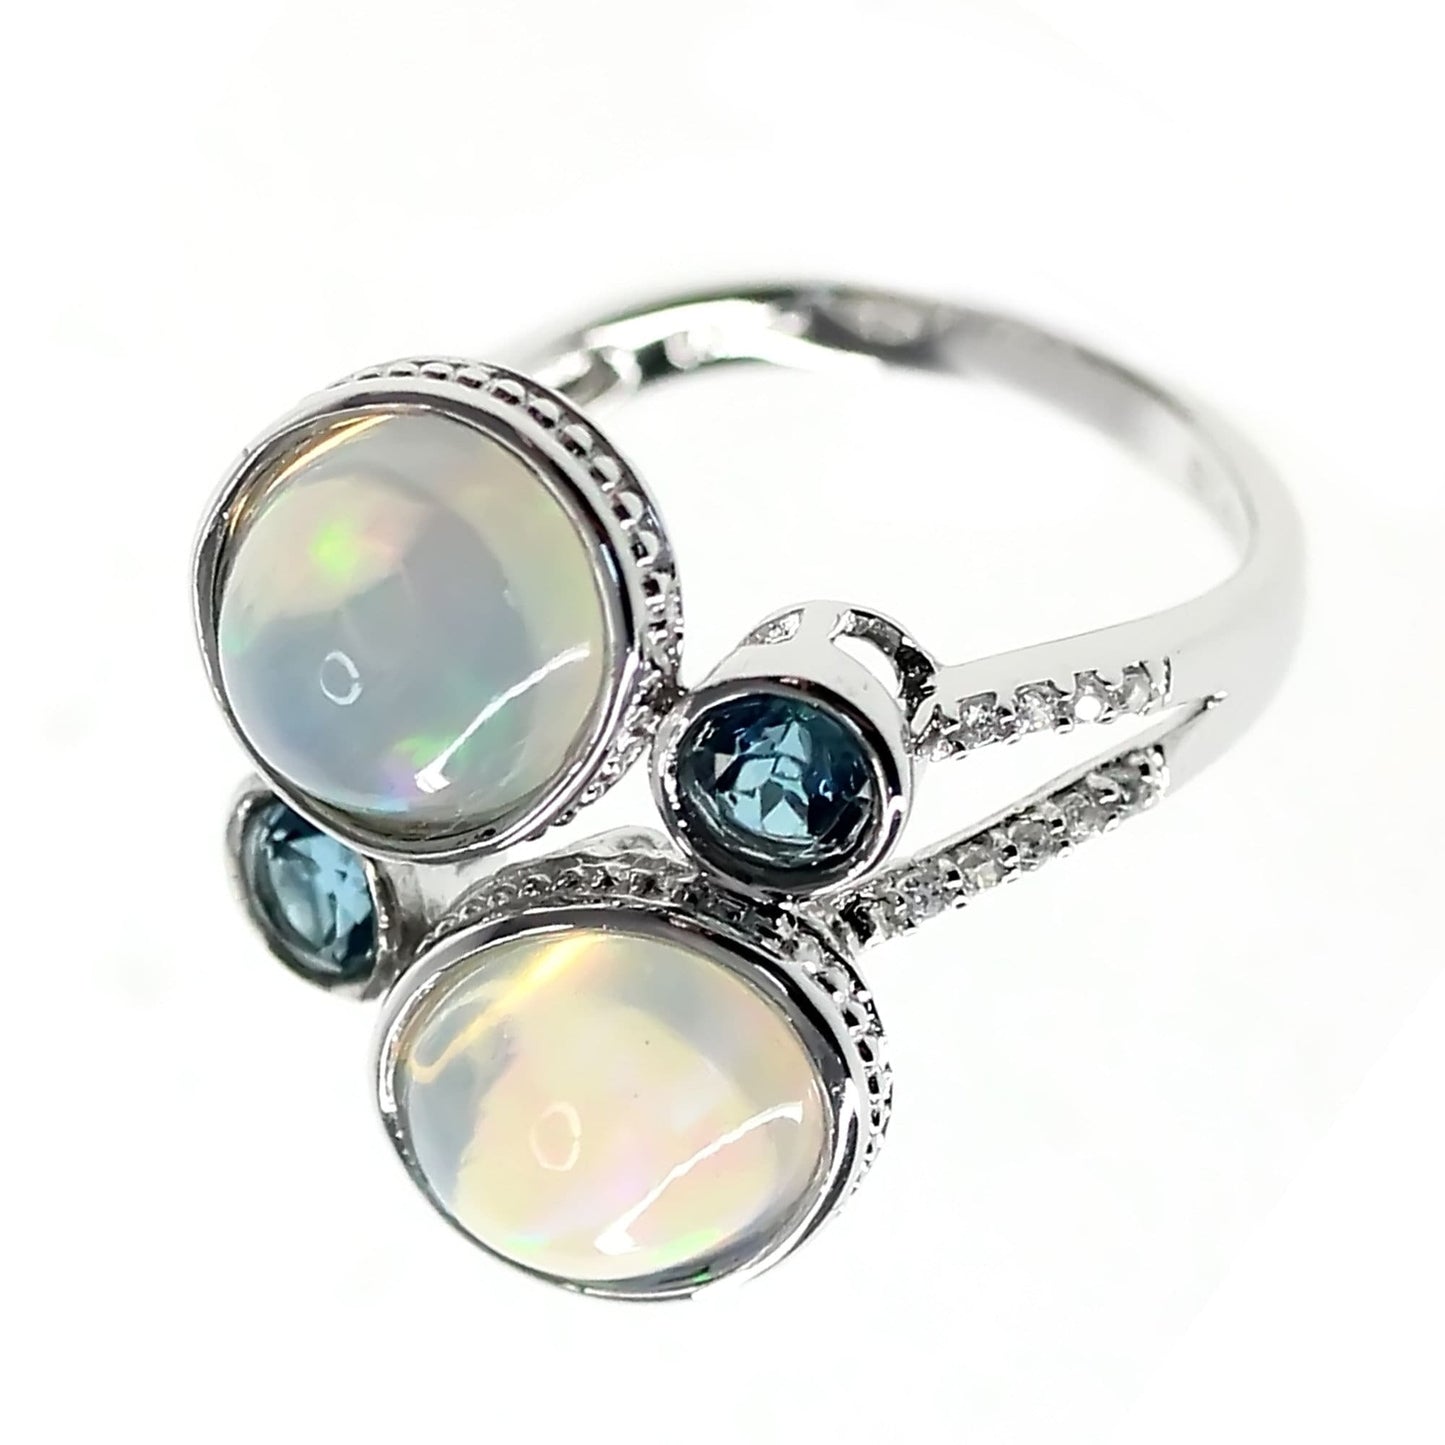 Ethiopian Opal Gemstone Ring, 925 Sterling Silver Ring, Engagement Ring, Birthstone Ring-Gemstone Jewelry Anniversary Gift-Gift For Her